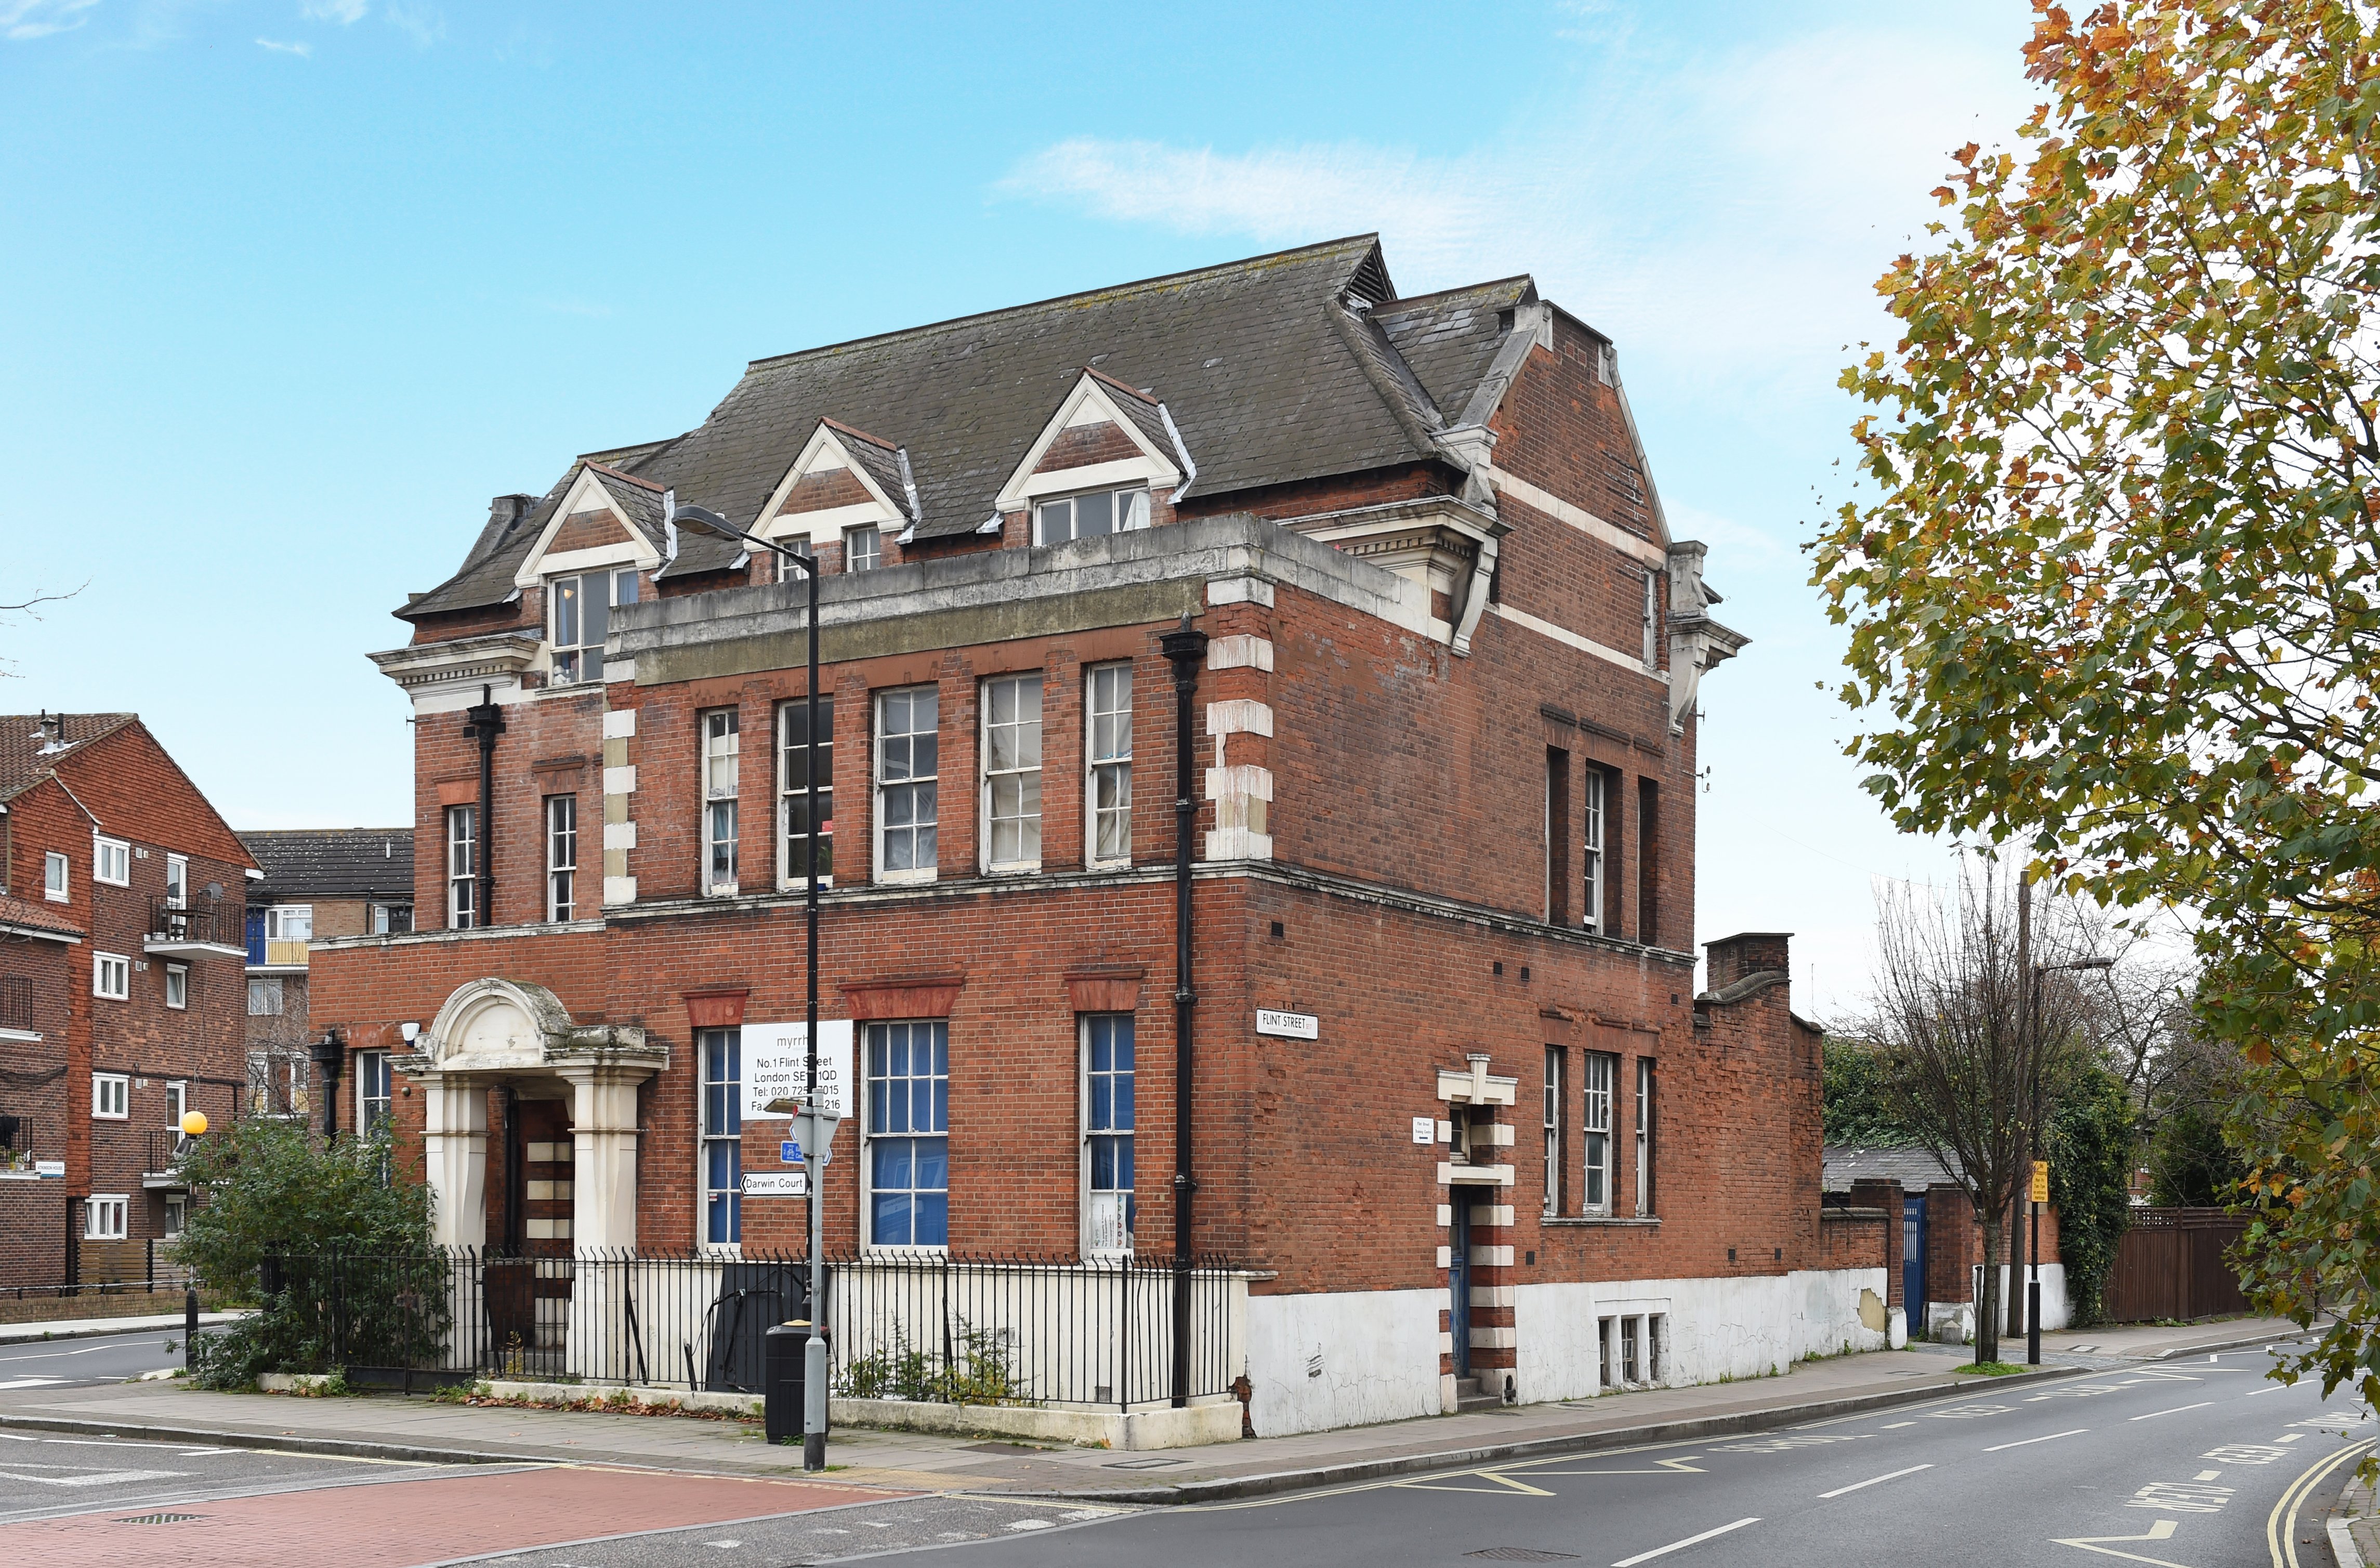 Sale of a Freehold, vacant former Police station in Elephant & Castle